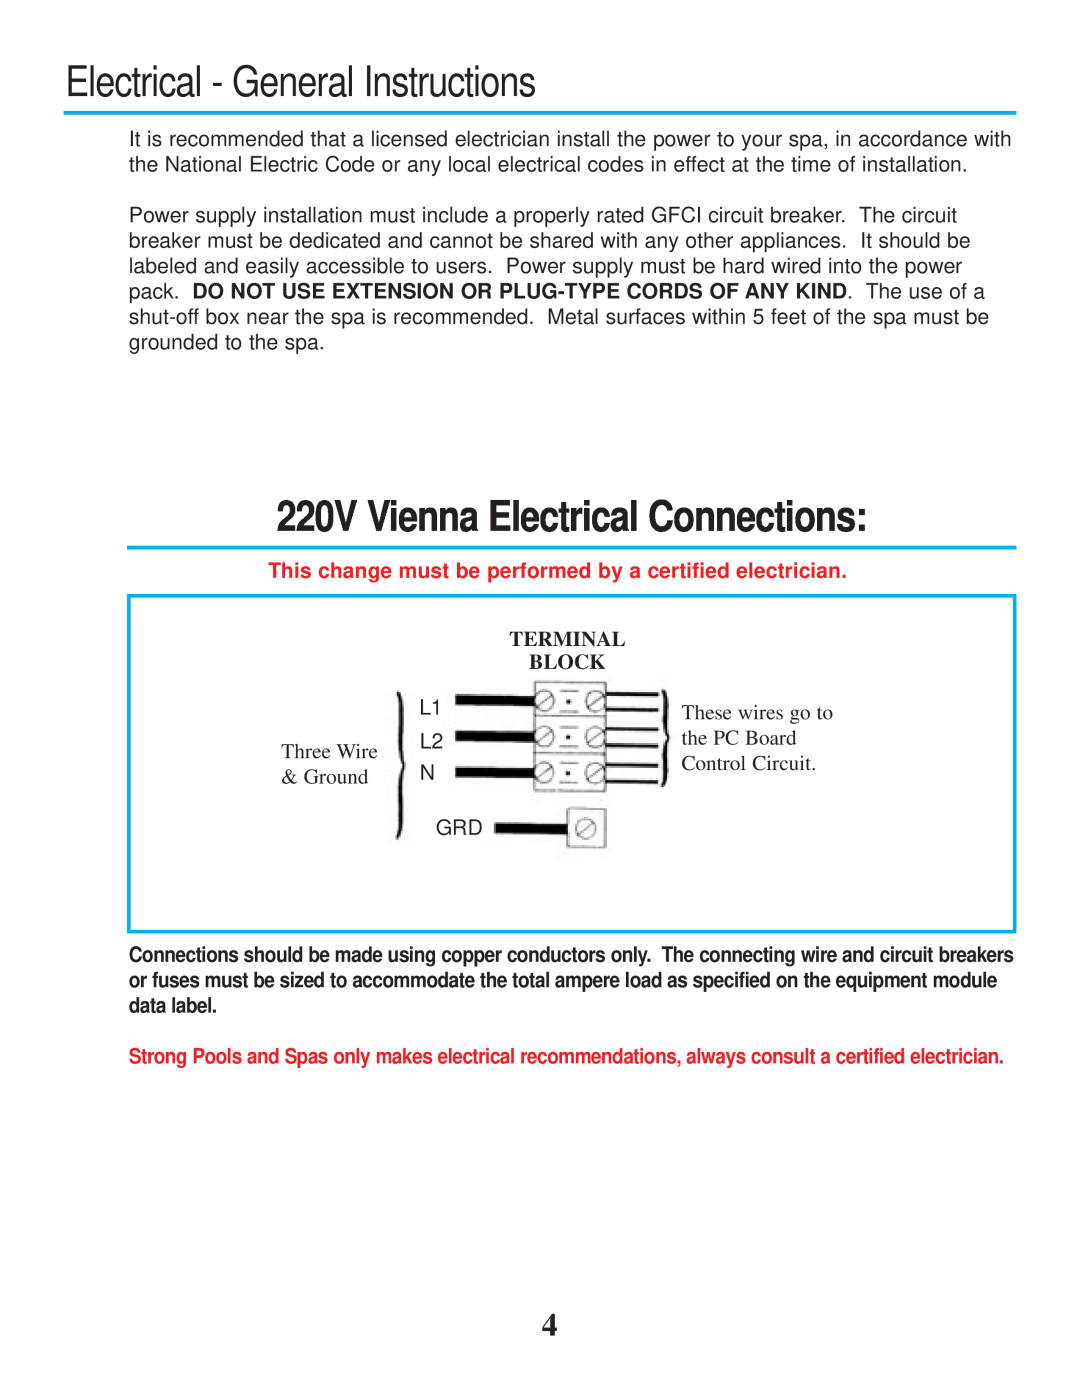 Strong Pools and Spas Electrical - General Instructions, 220V Vienna Electrical Connections, Three Wire, Ground 